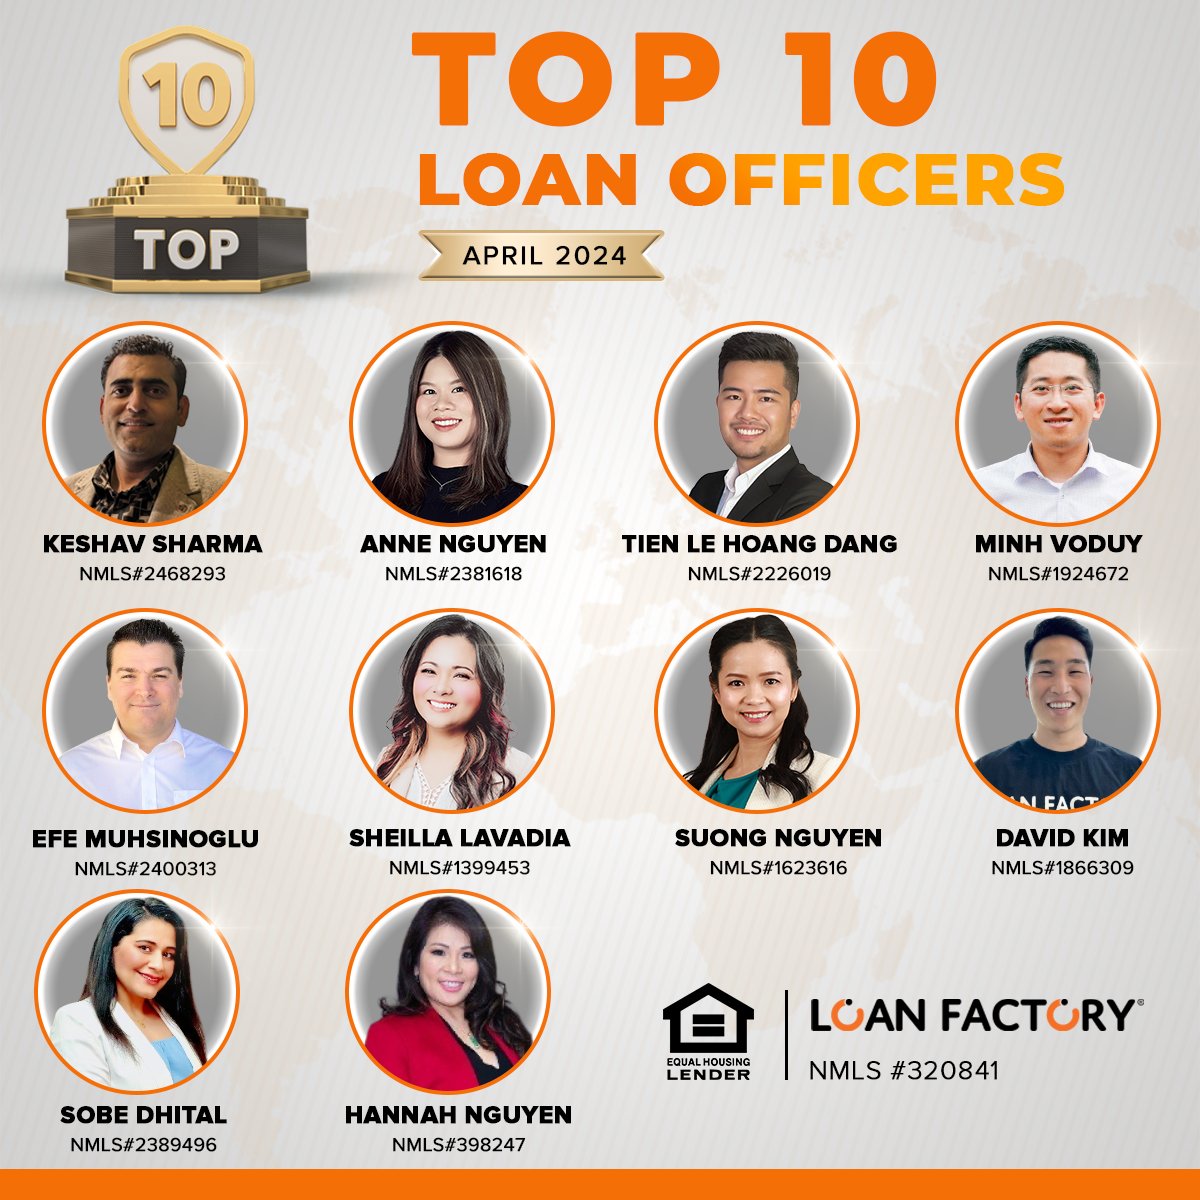 🎉 Congratulations to our top 10 loan officers of April! 
🏆 Your dedication and hard work have set the bar high. Here's to your continued success! 

#TopPerformers #LoanOfficerExcellence #AprilAchievements #LoanFactory
__
LOAN FACTORY - WE DARE YOU TO COMPARE
🔐 CO-NMLS #320841